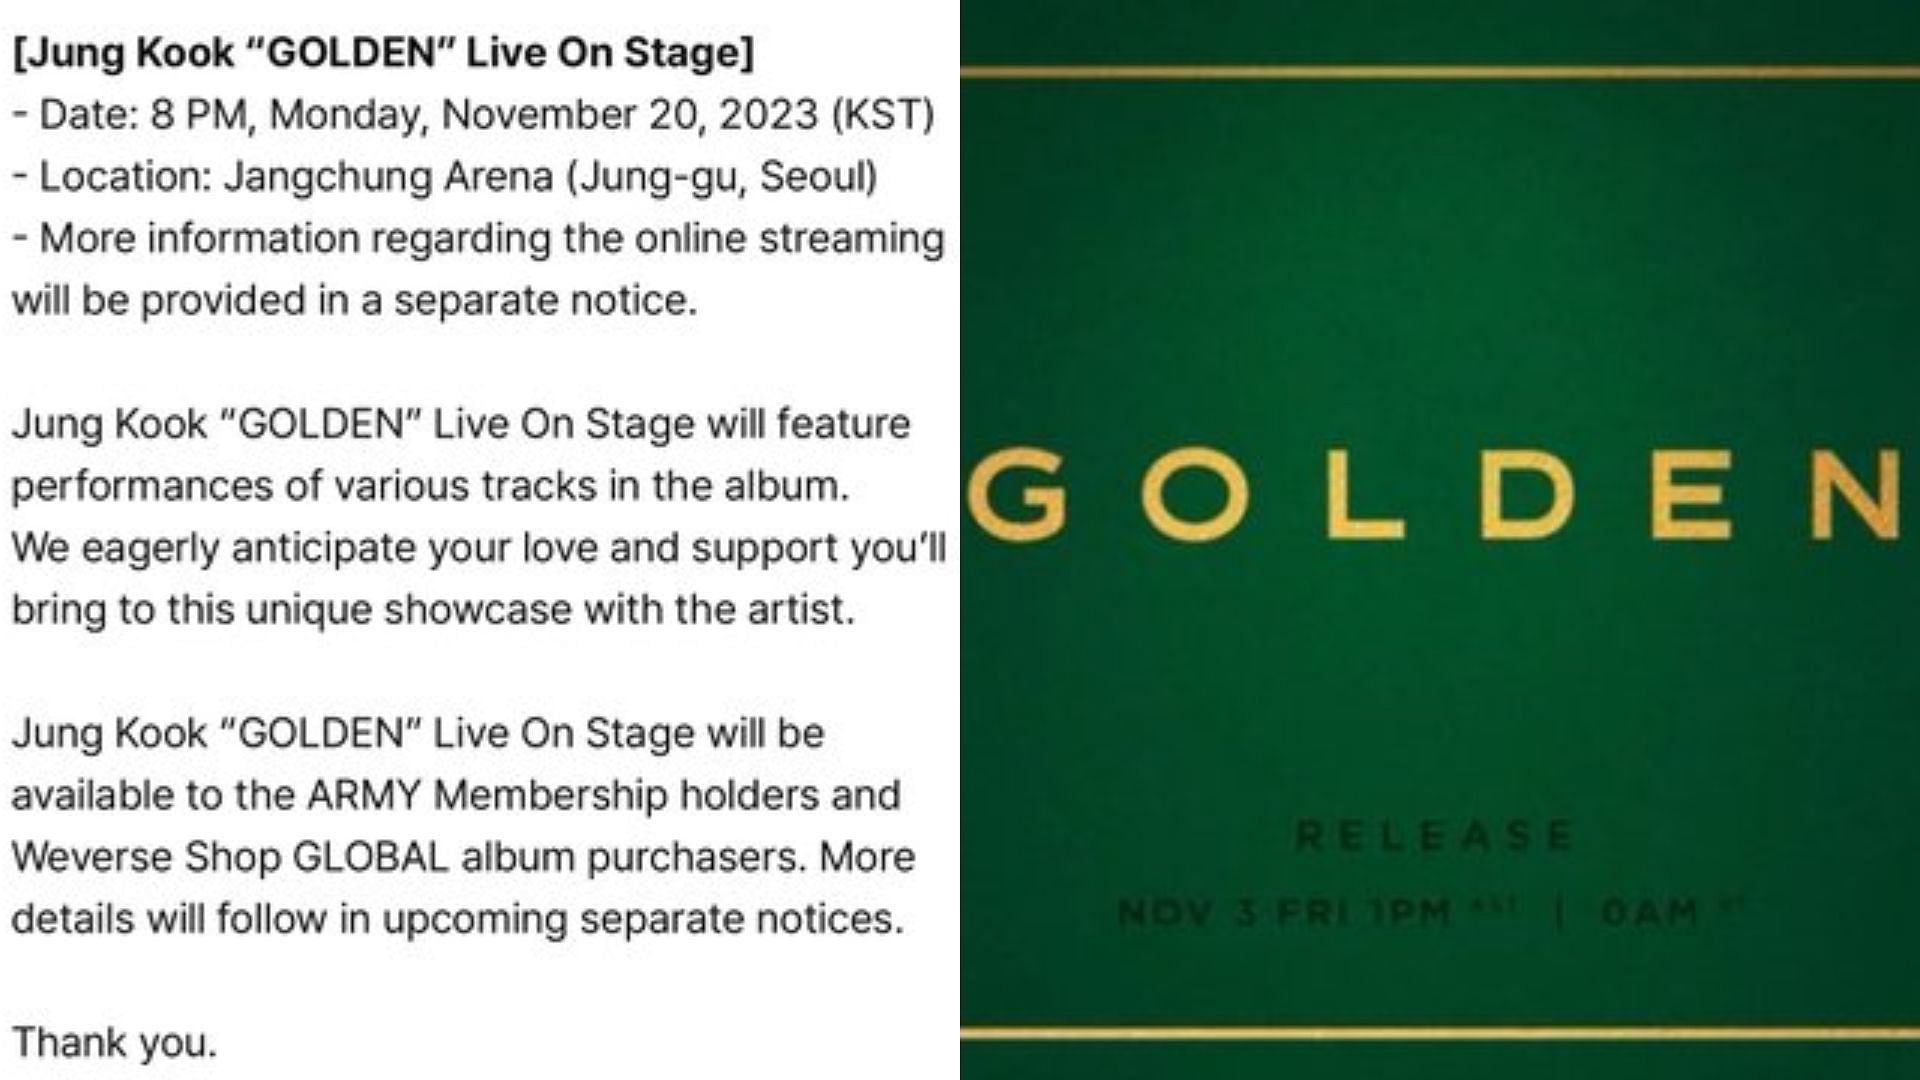 My Golden Popstar”: BTS' Jungkook's fans excitedly anticipate his  first-ever concert, GOLDEN Live On Stage”